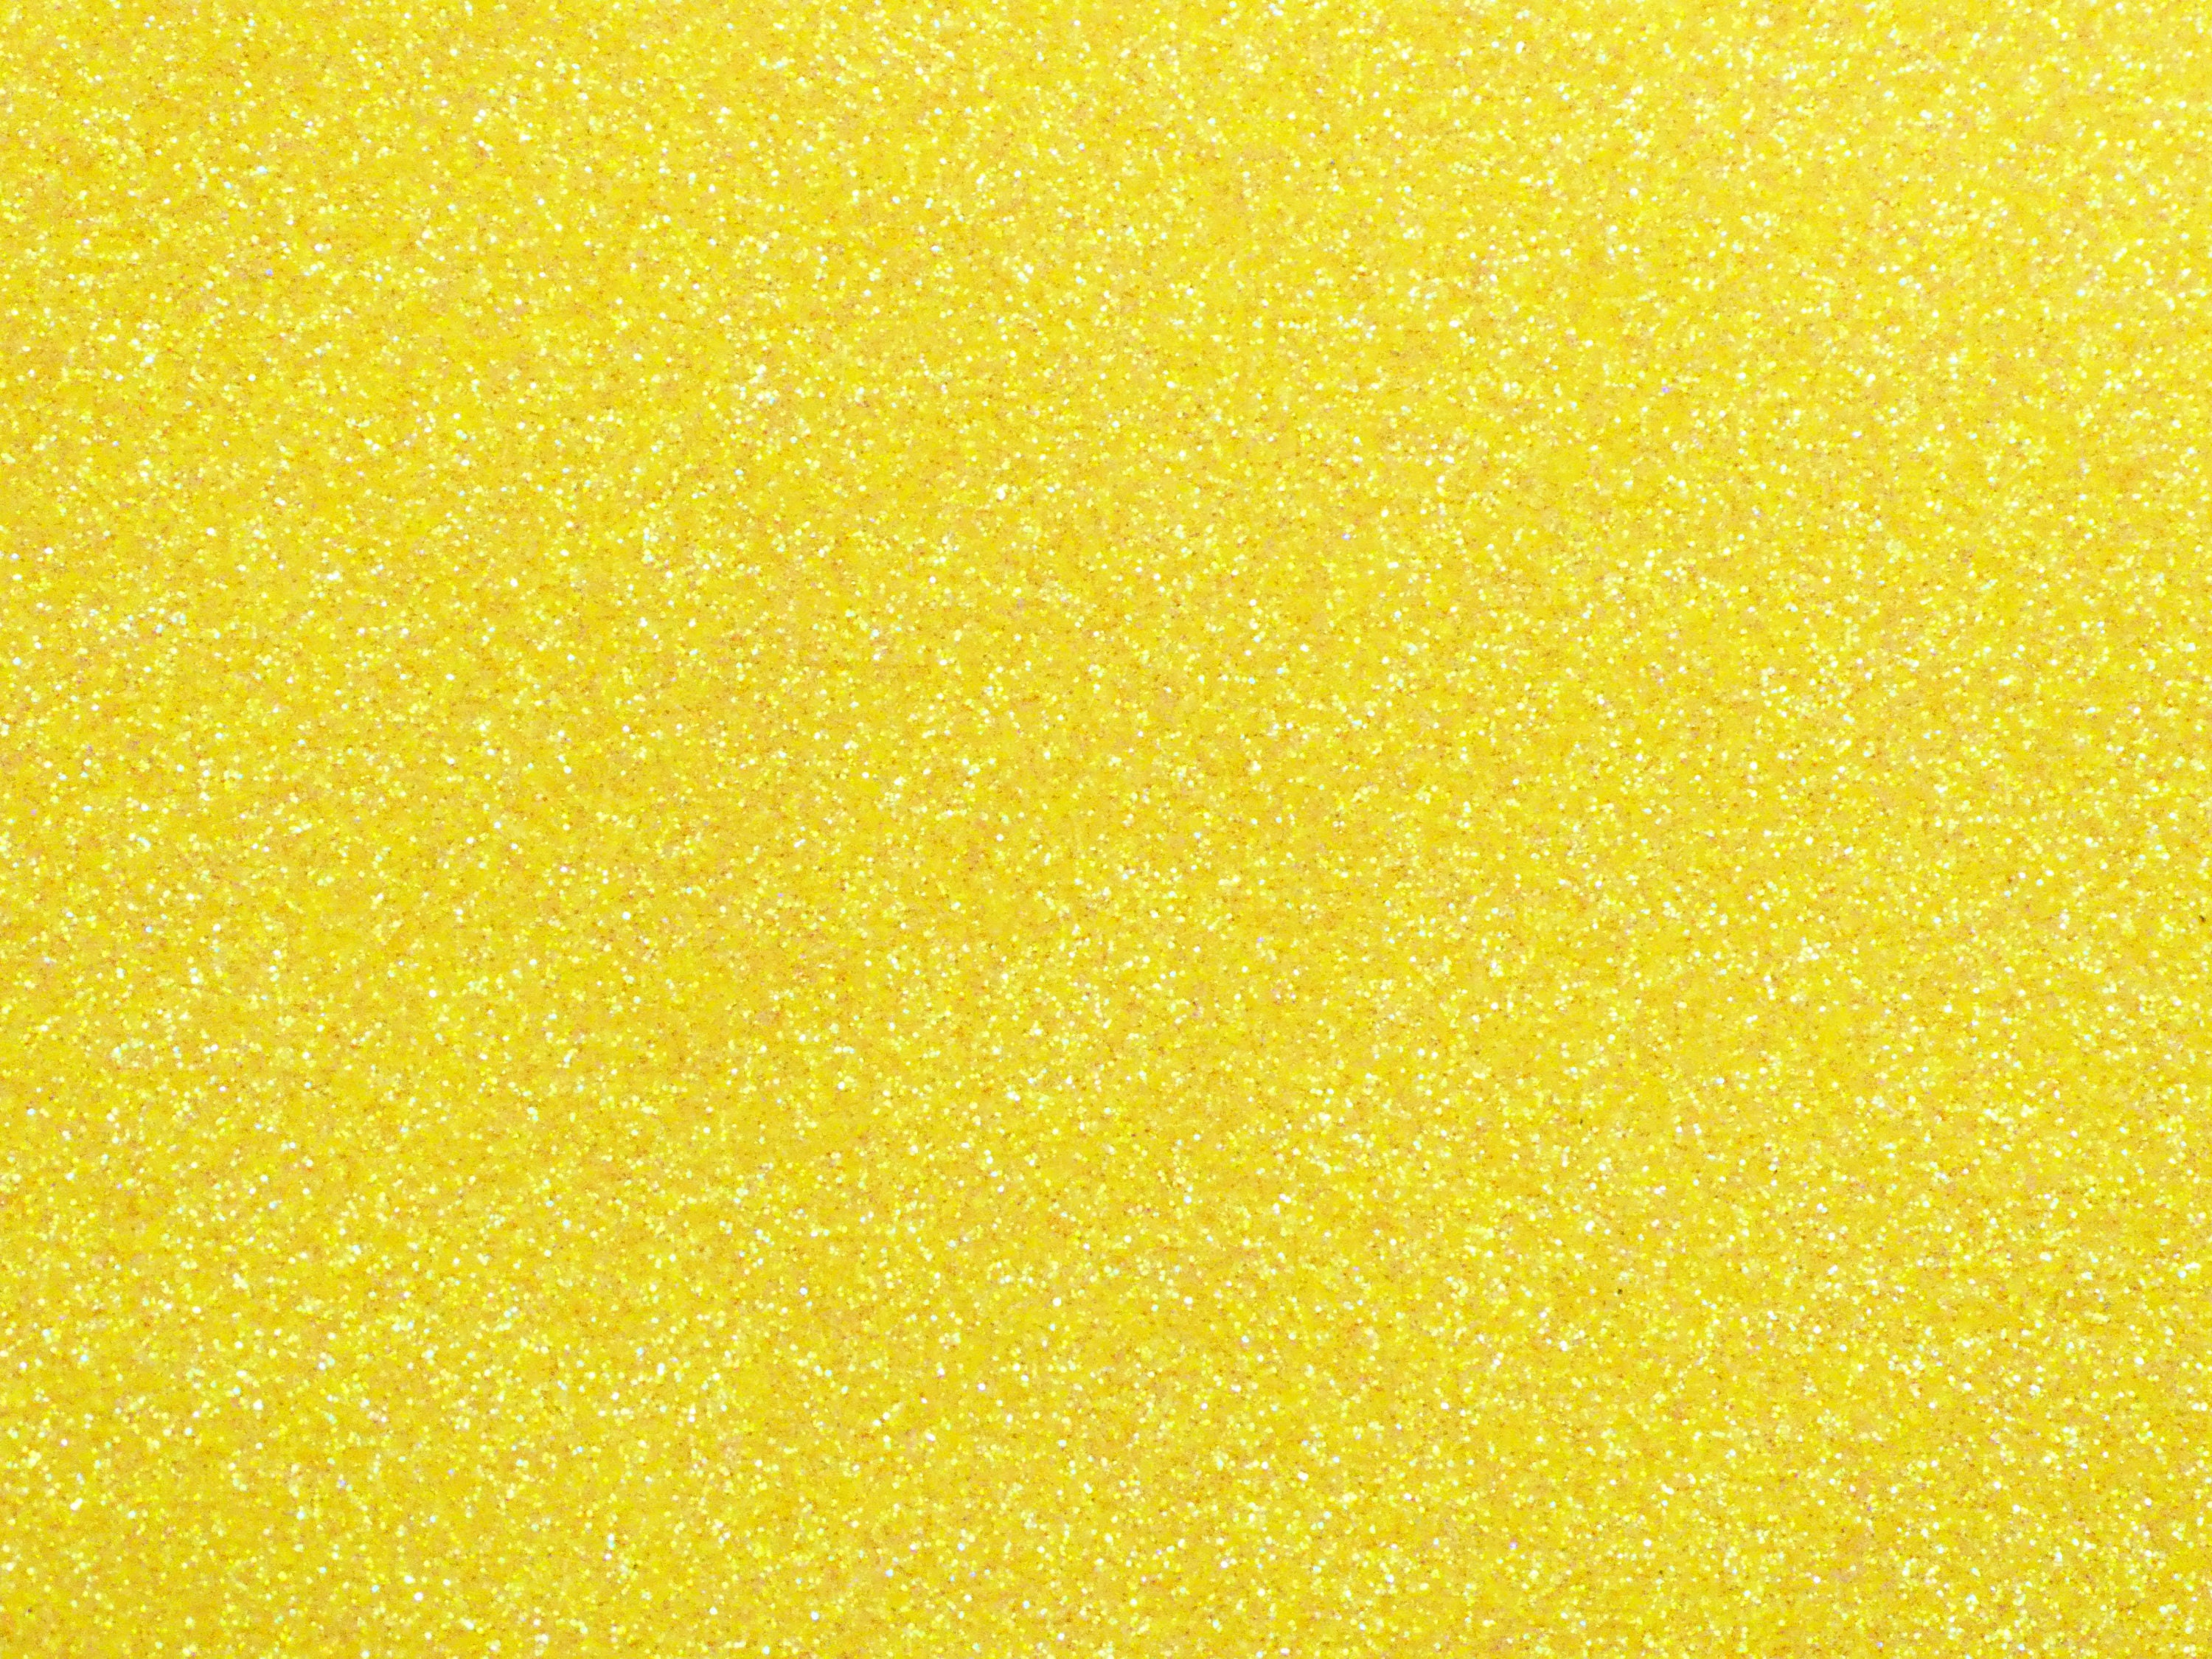 Fine GLITTER 8x10 Glorious SUNSHINE YELLOW Fabric applied to Leather  5-5.5oz/ 2-2.2 mm PeggySueAlso® E4355-23